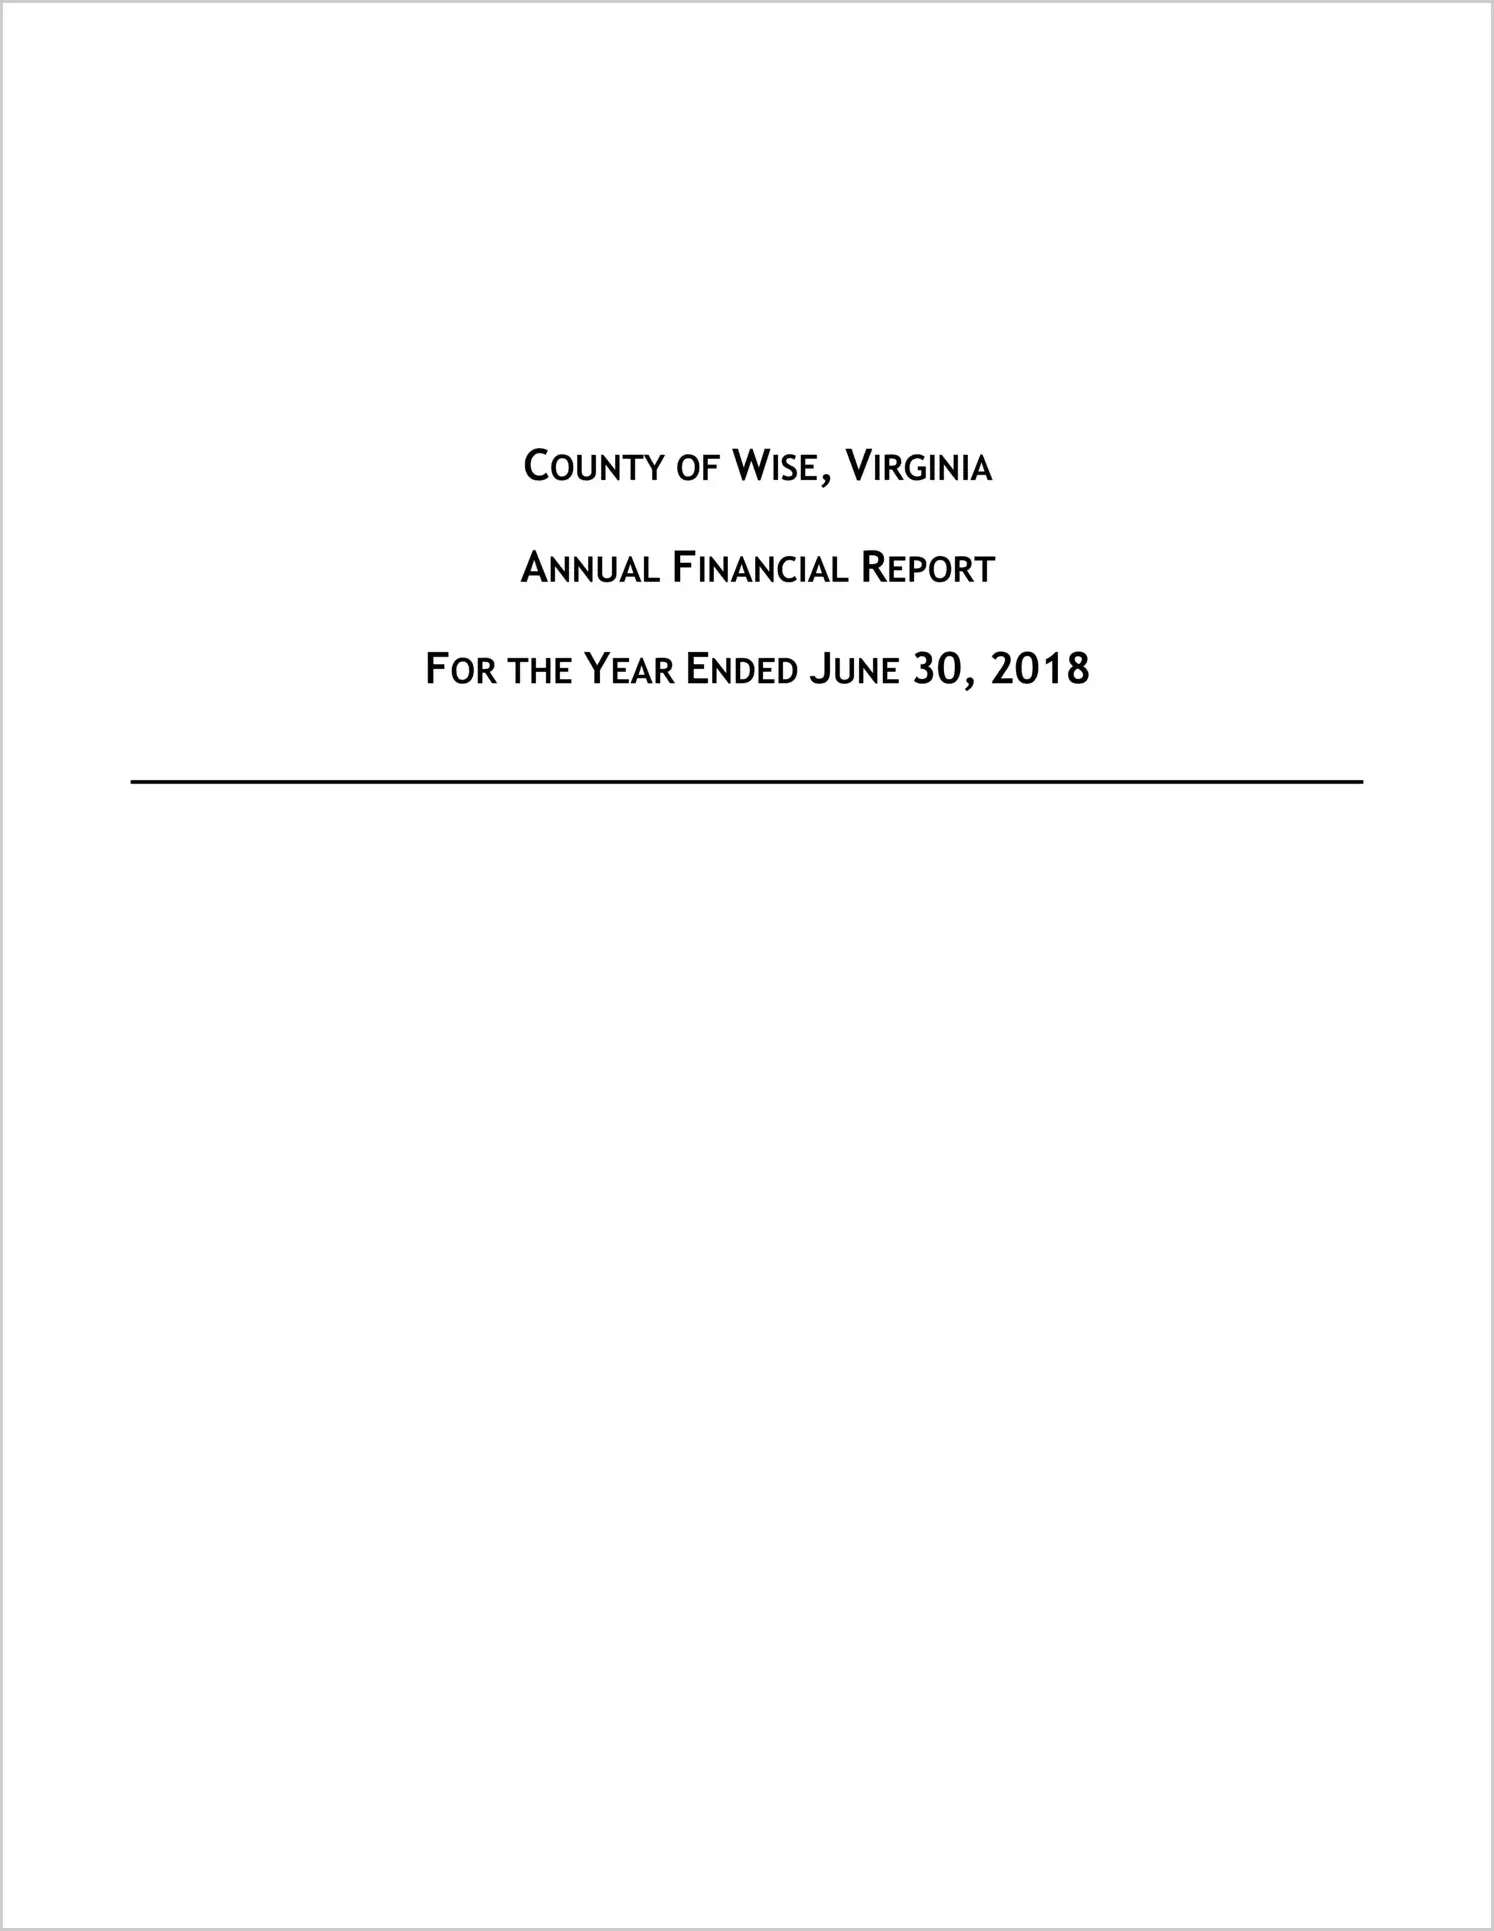 2018 Annual Financial Report for County of Wise